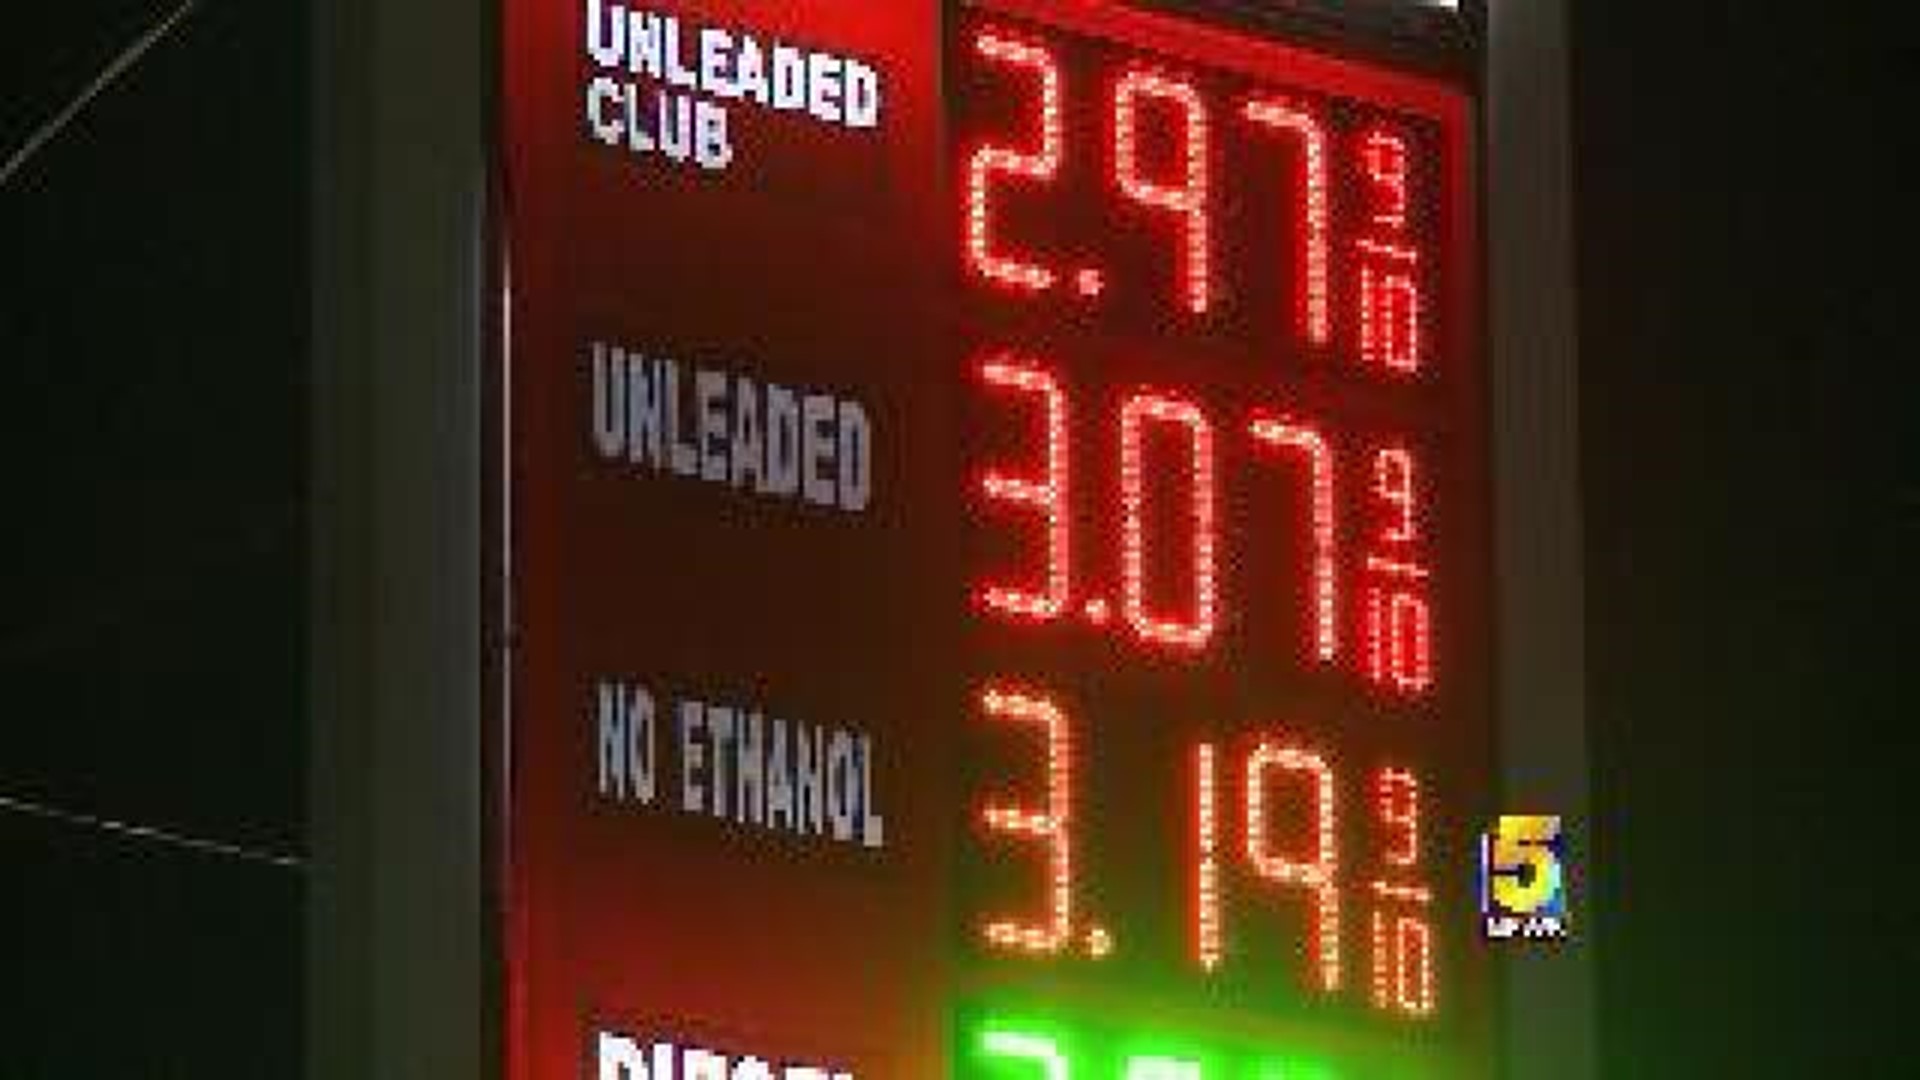 Gas Prices Drop